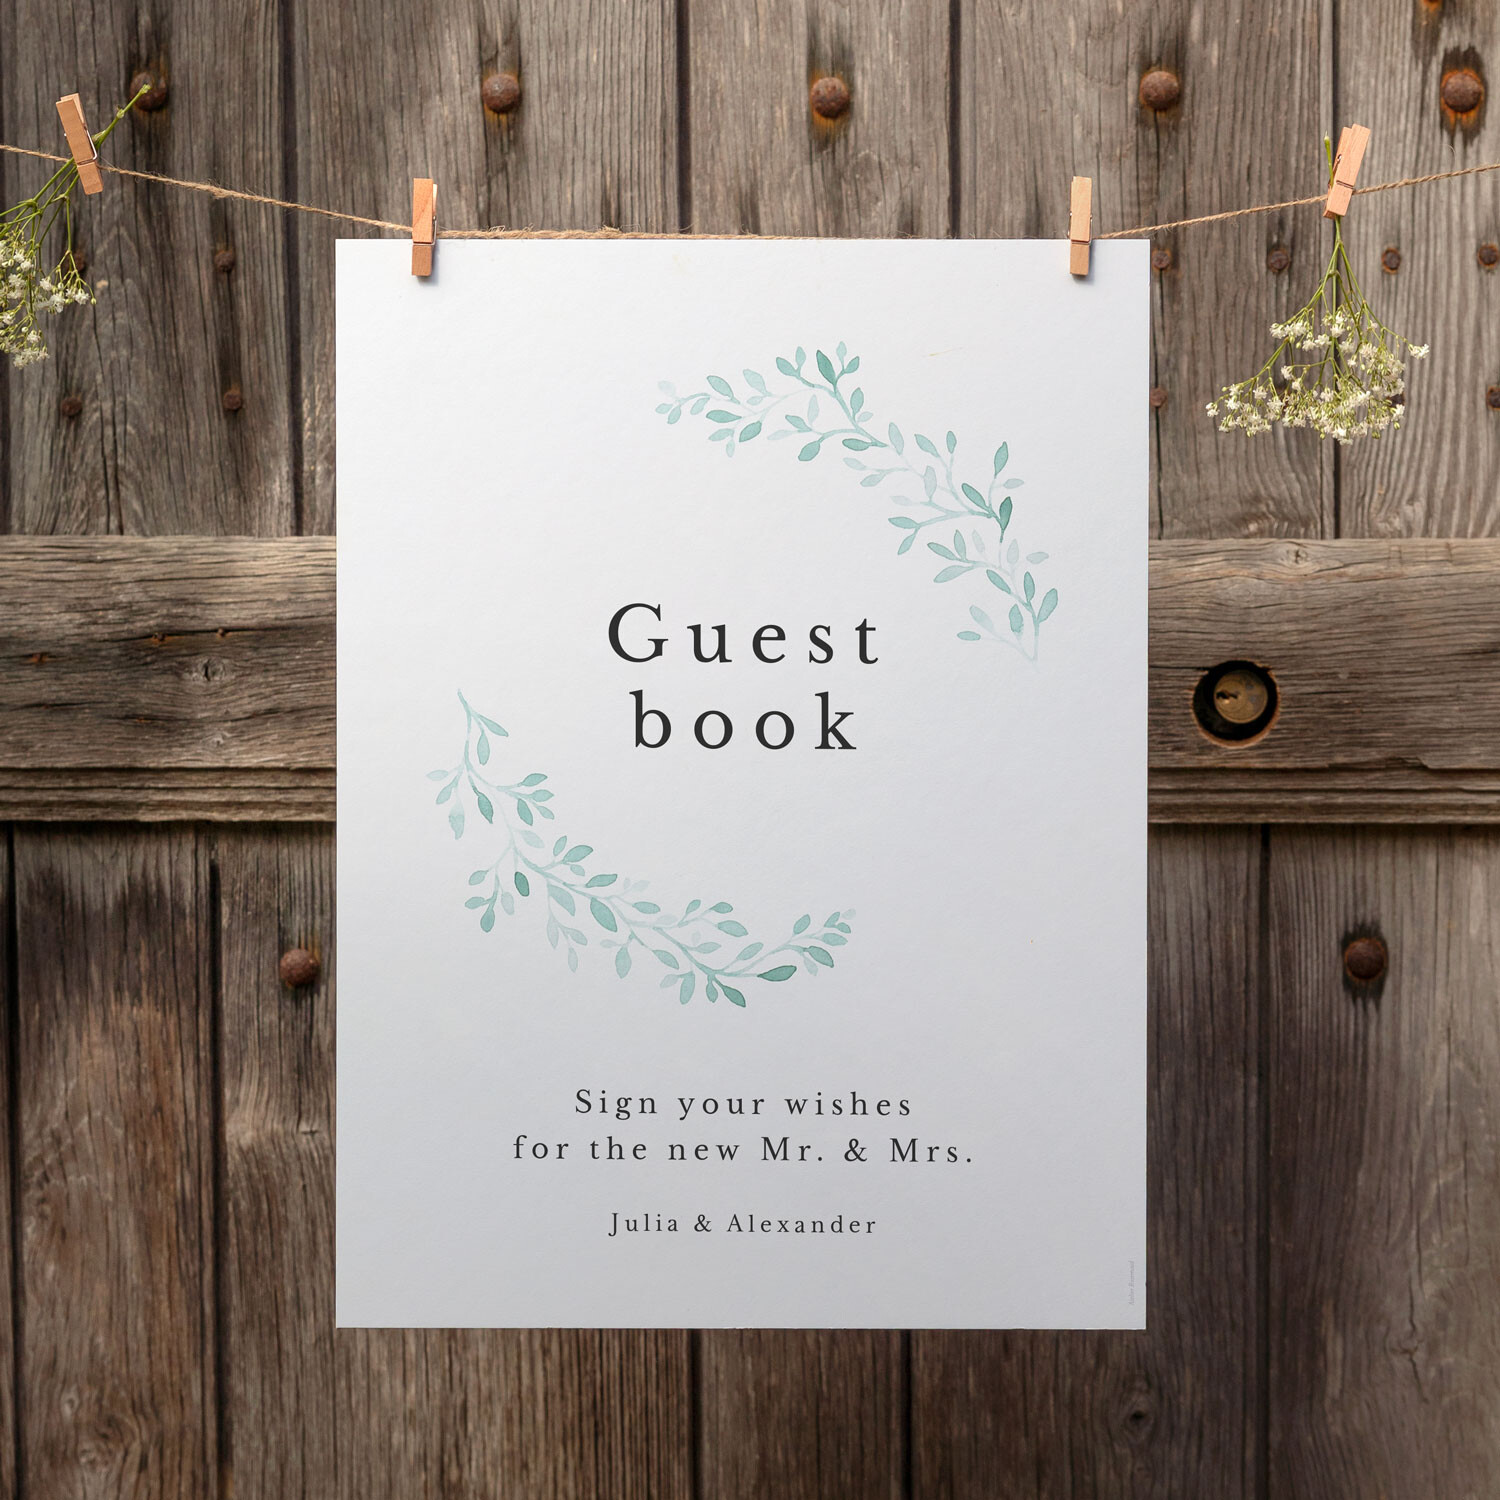 Everything You Need to Know About the Wedding Guest Book